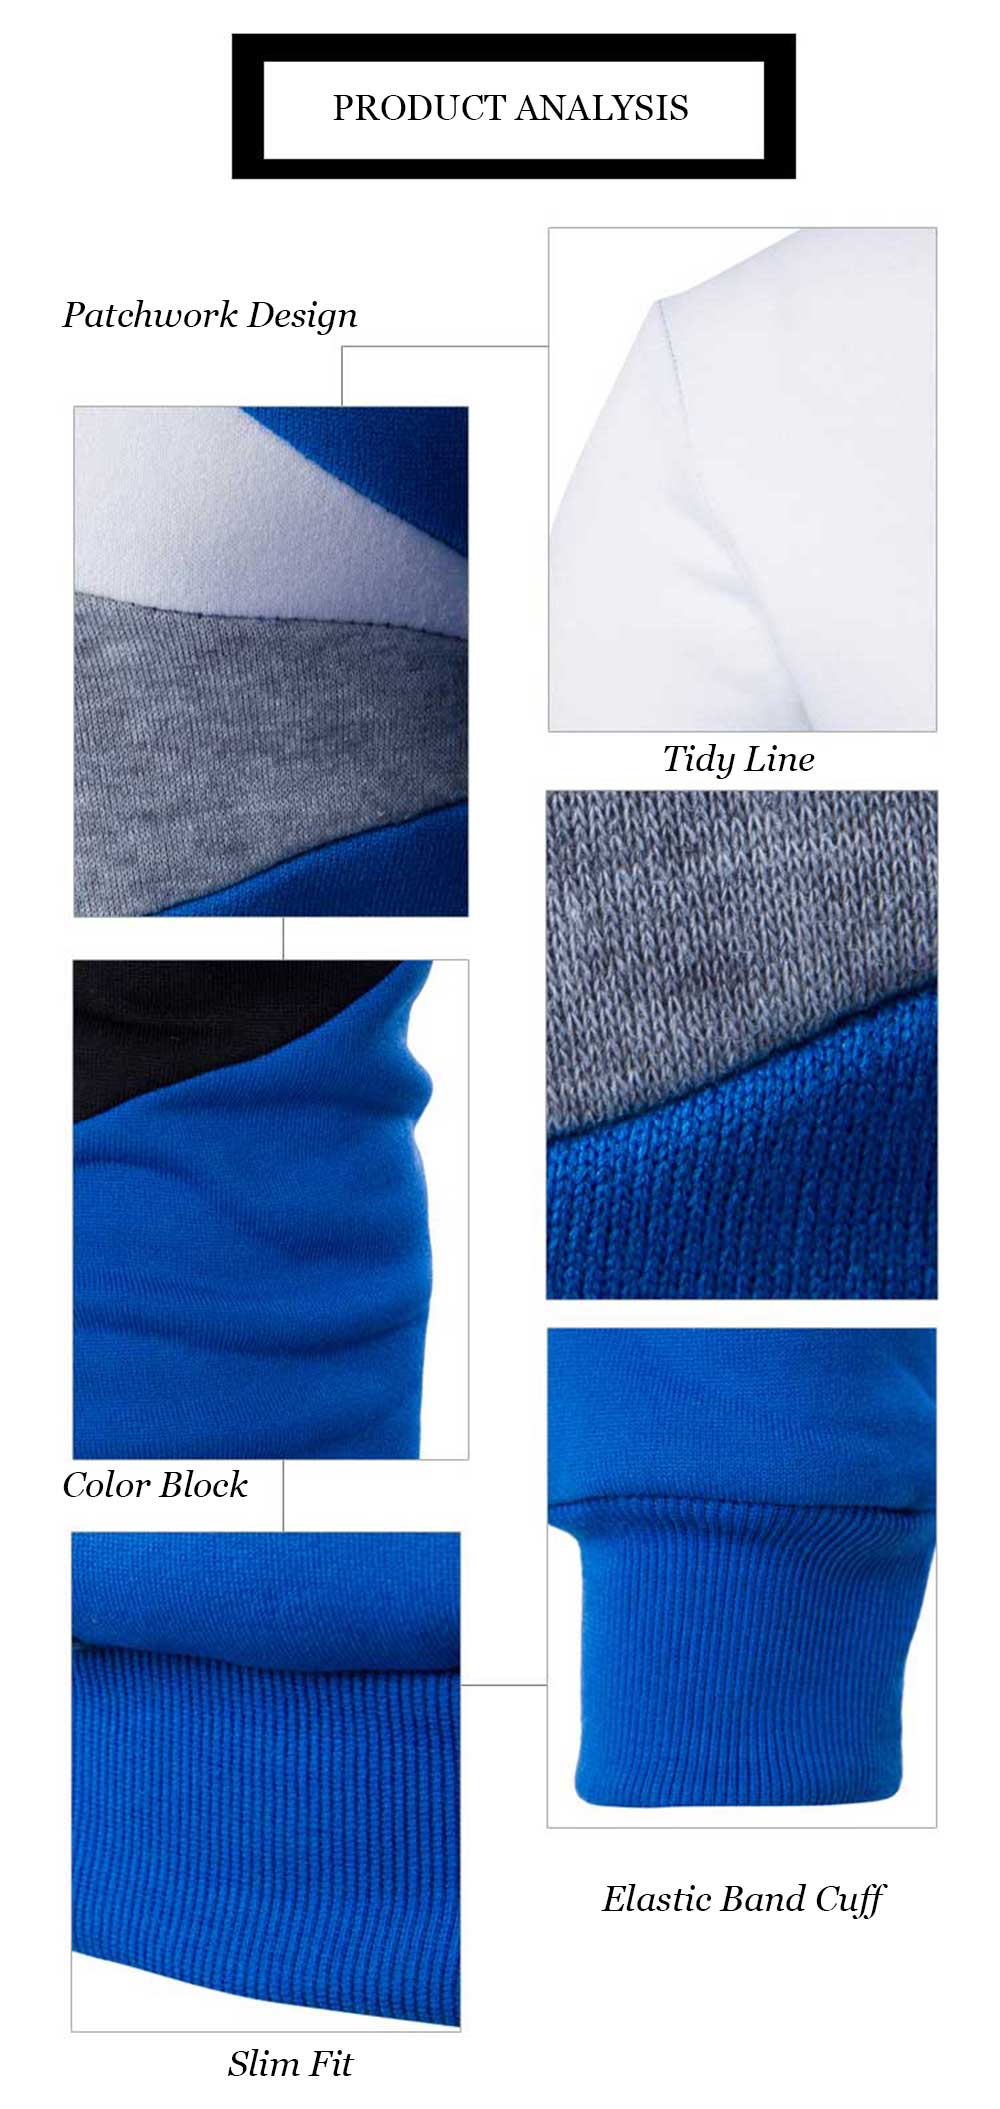 Casual Color Block Long Sleeve Pullover Sweater for Men